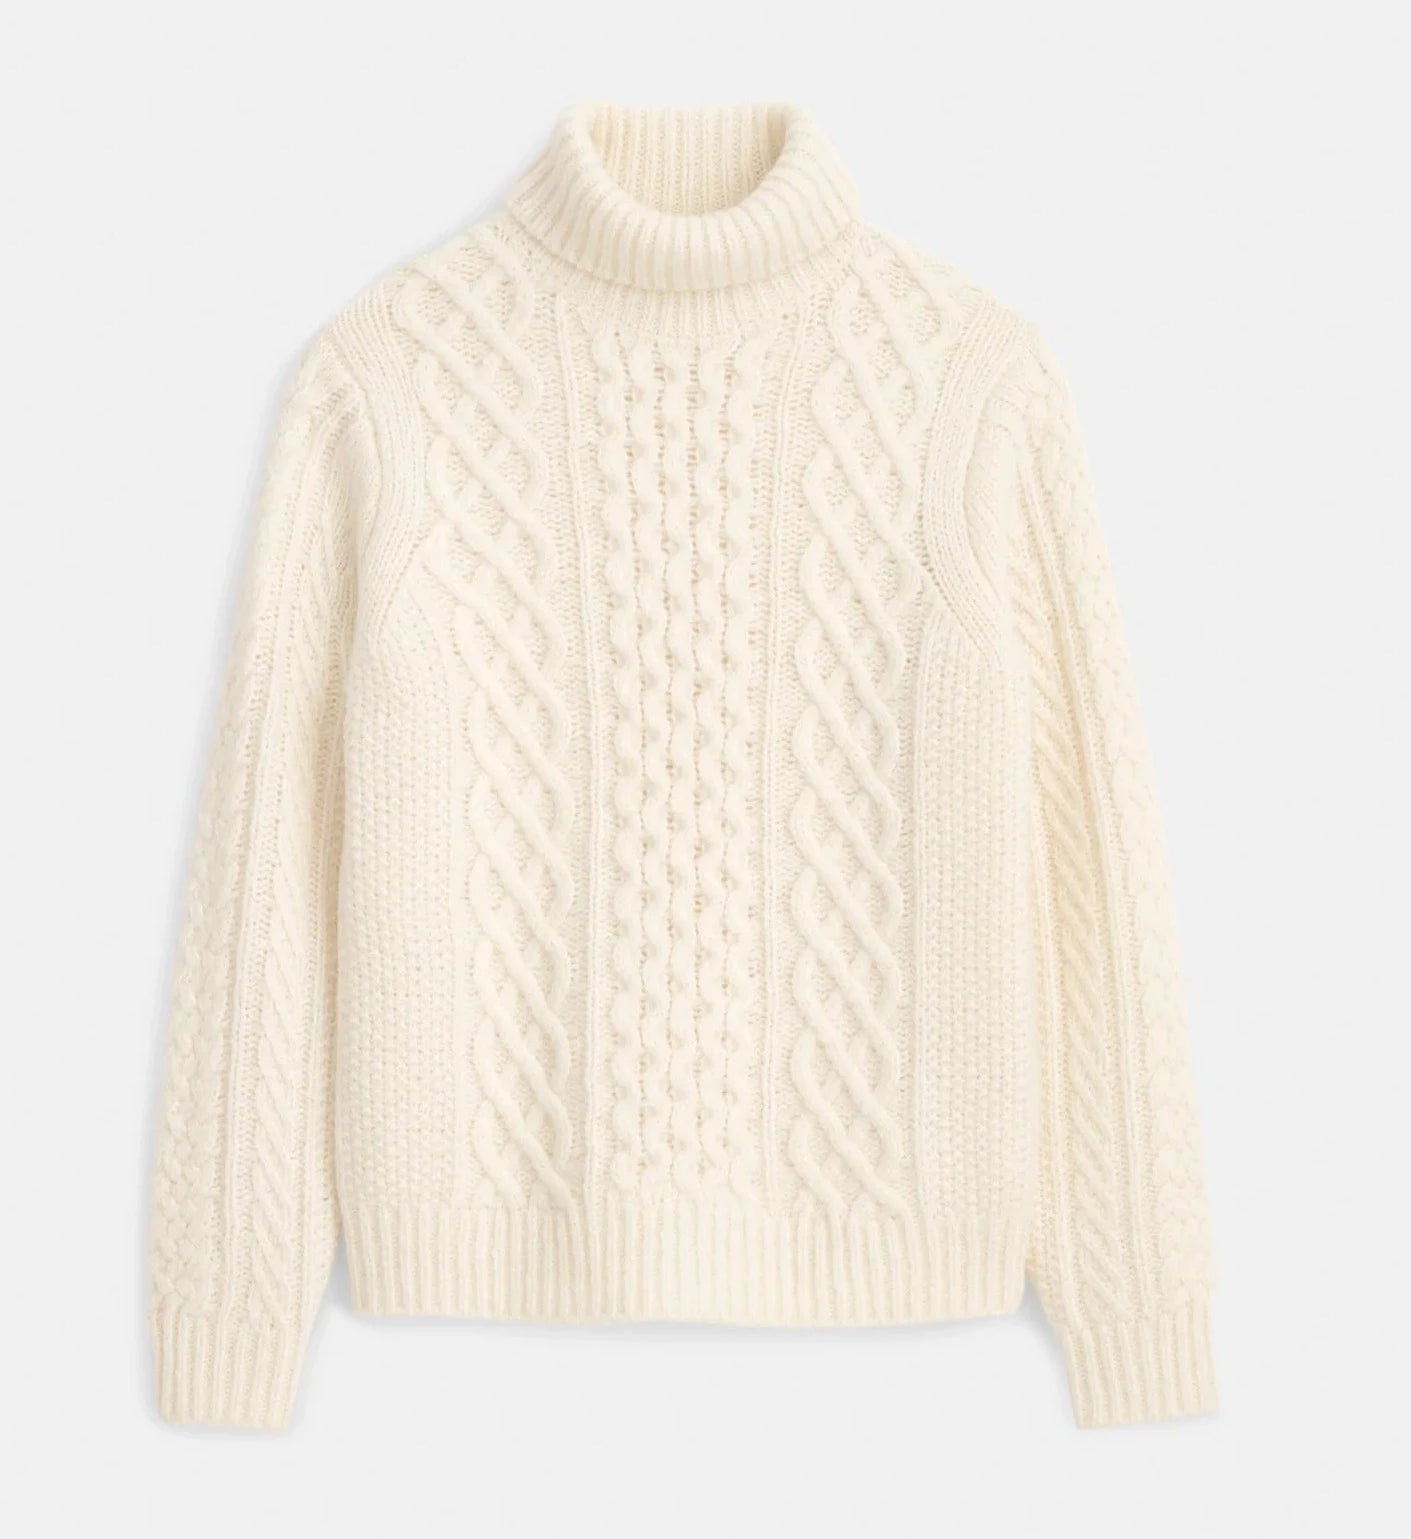 Alex Mill - Fisherman Cable Turtleneck Sweater in Ivory - City Workshop Men's Supply Co.